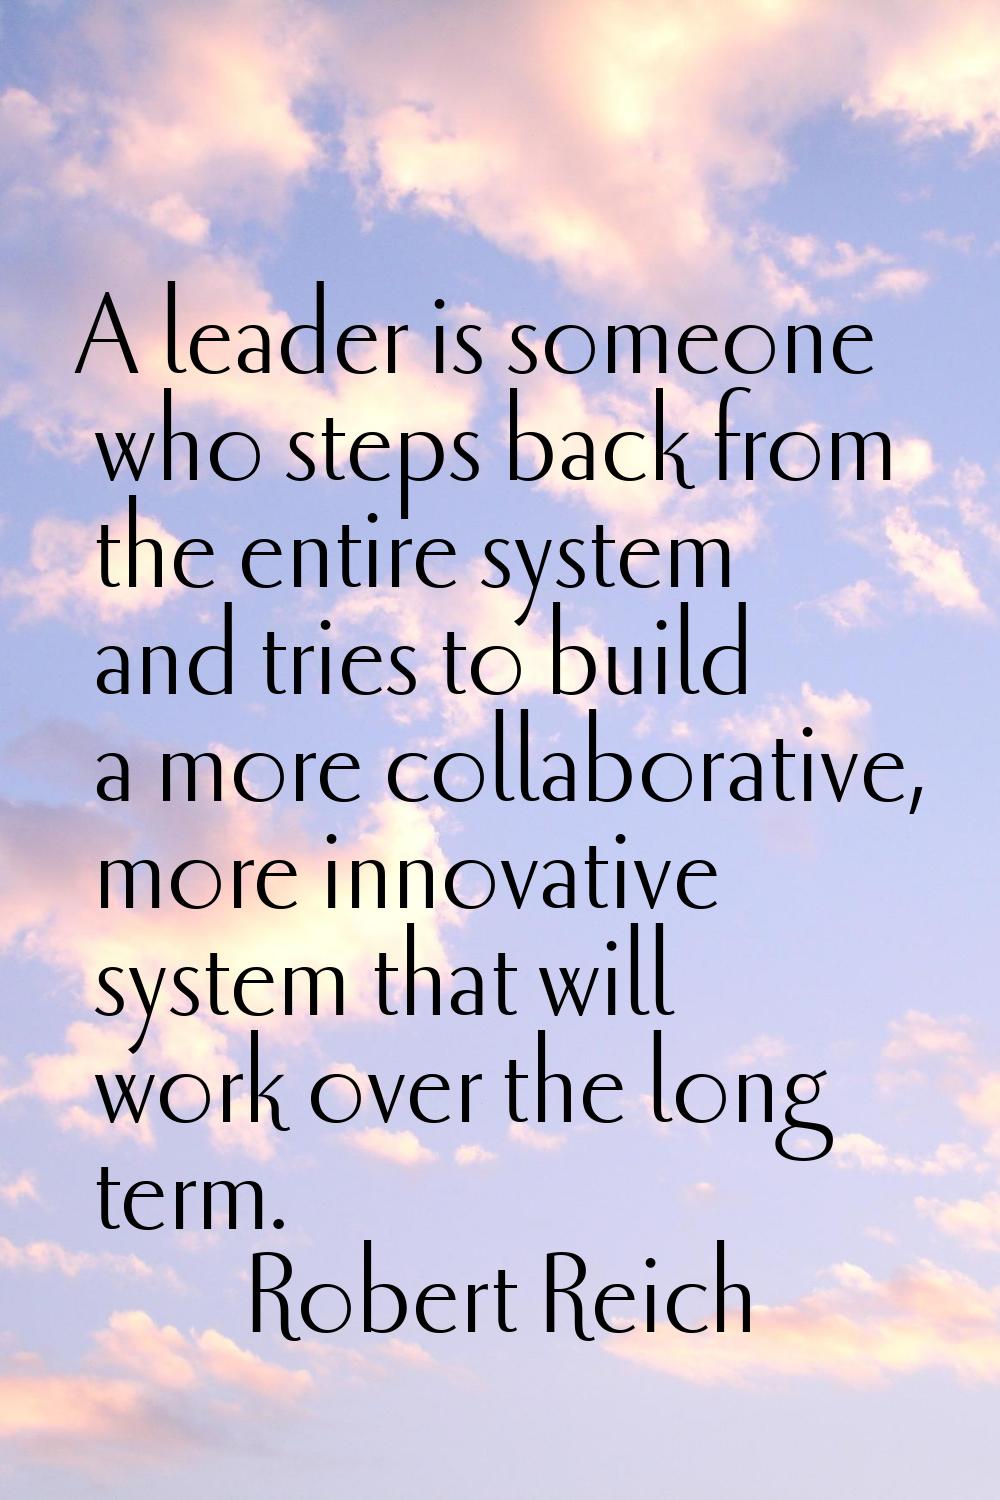 A leader is someone who steps back from the entire system and tries to build a more collaborative, 